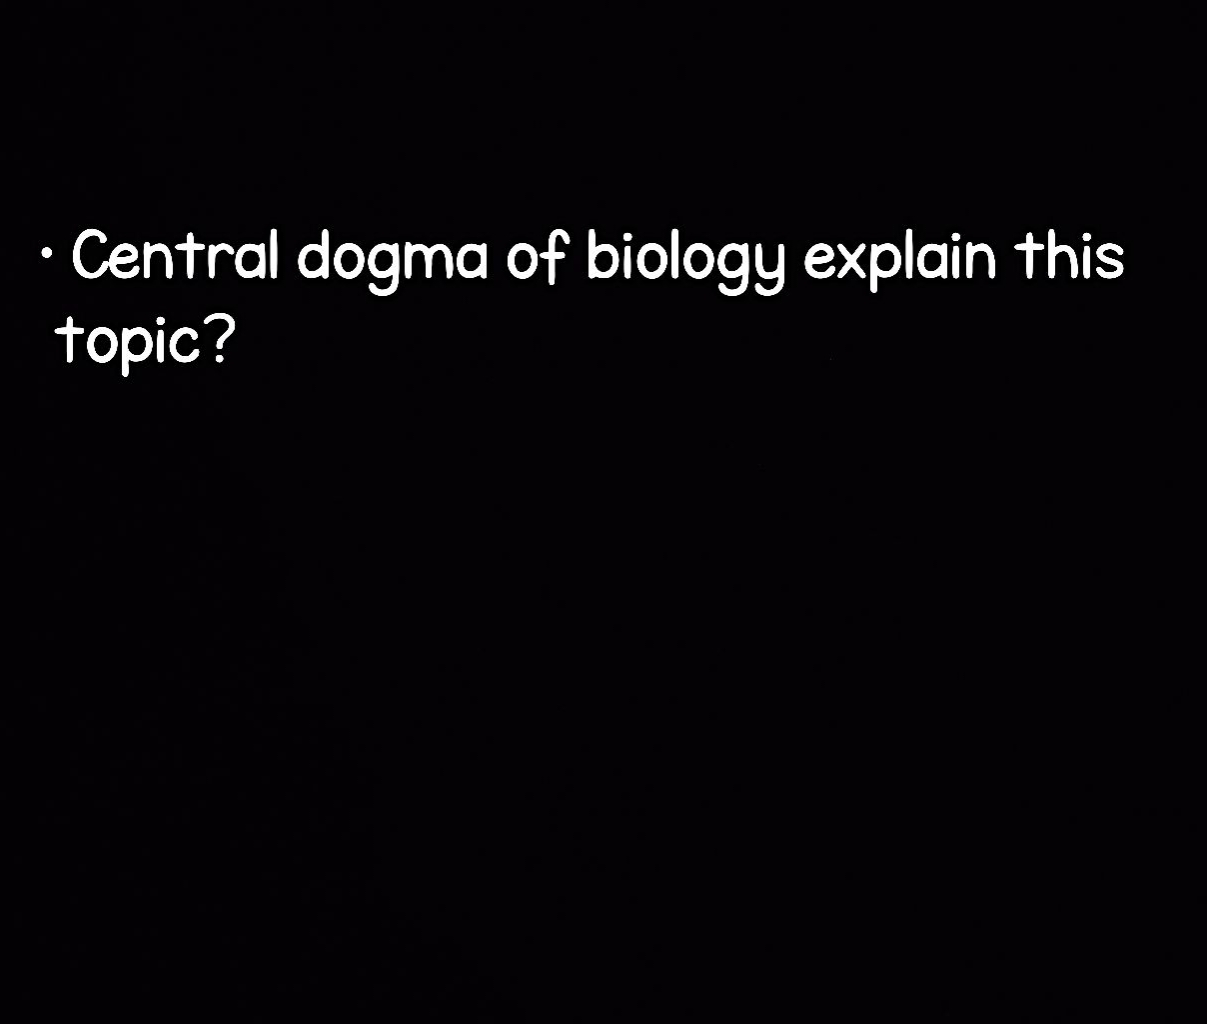 - Central dogma of biology explain this topic?
